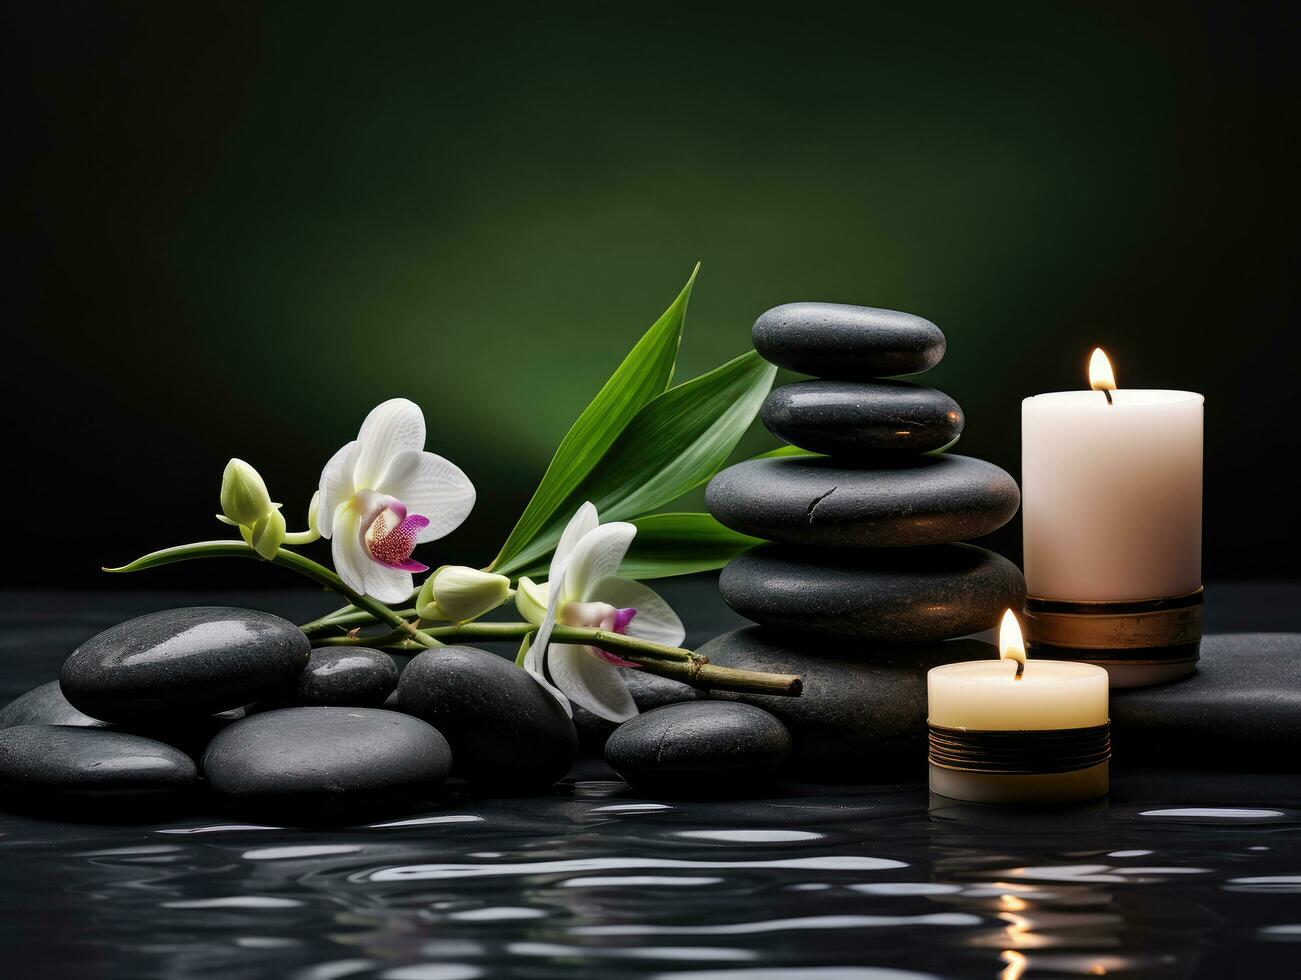 Relaxing zen like background with pebbles and lotus flowers photo